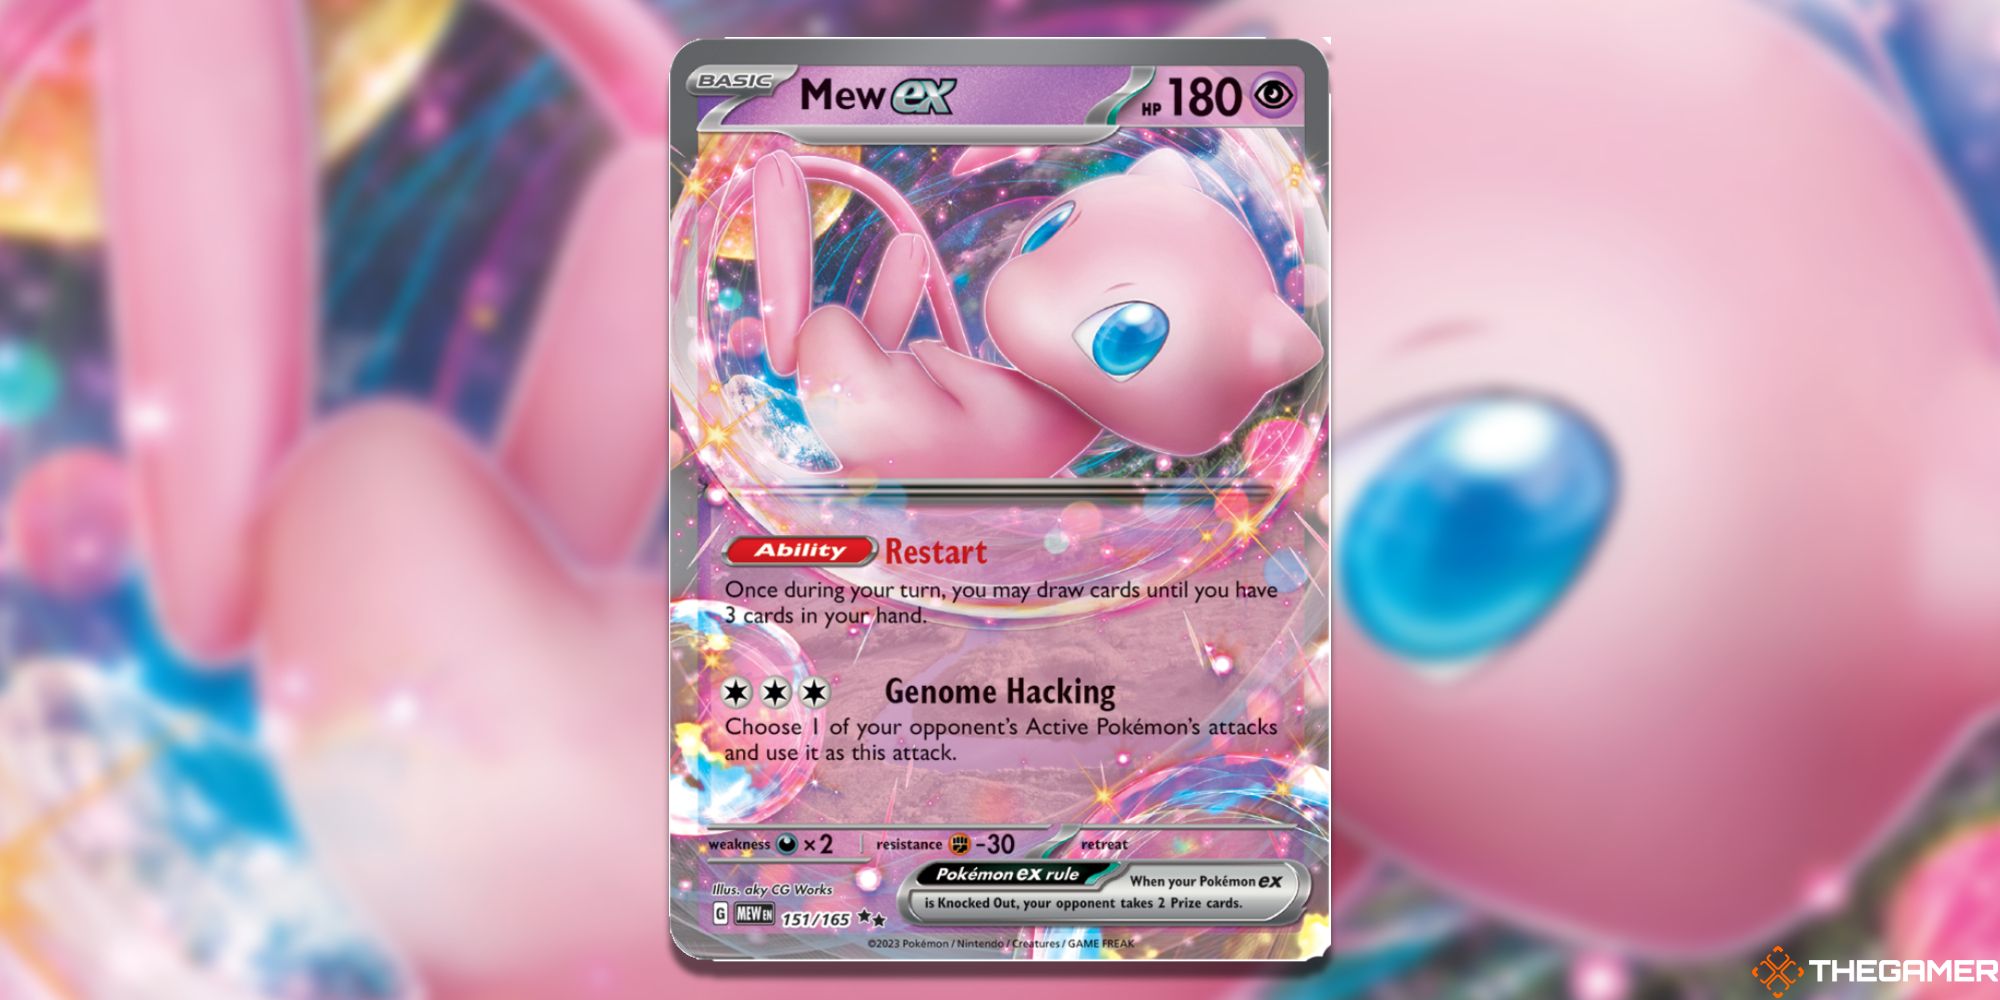 Image of the Mew ex card in Magic: The Gathering, with art by aky CG Works